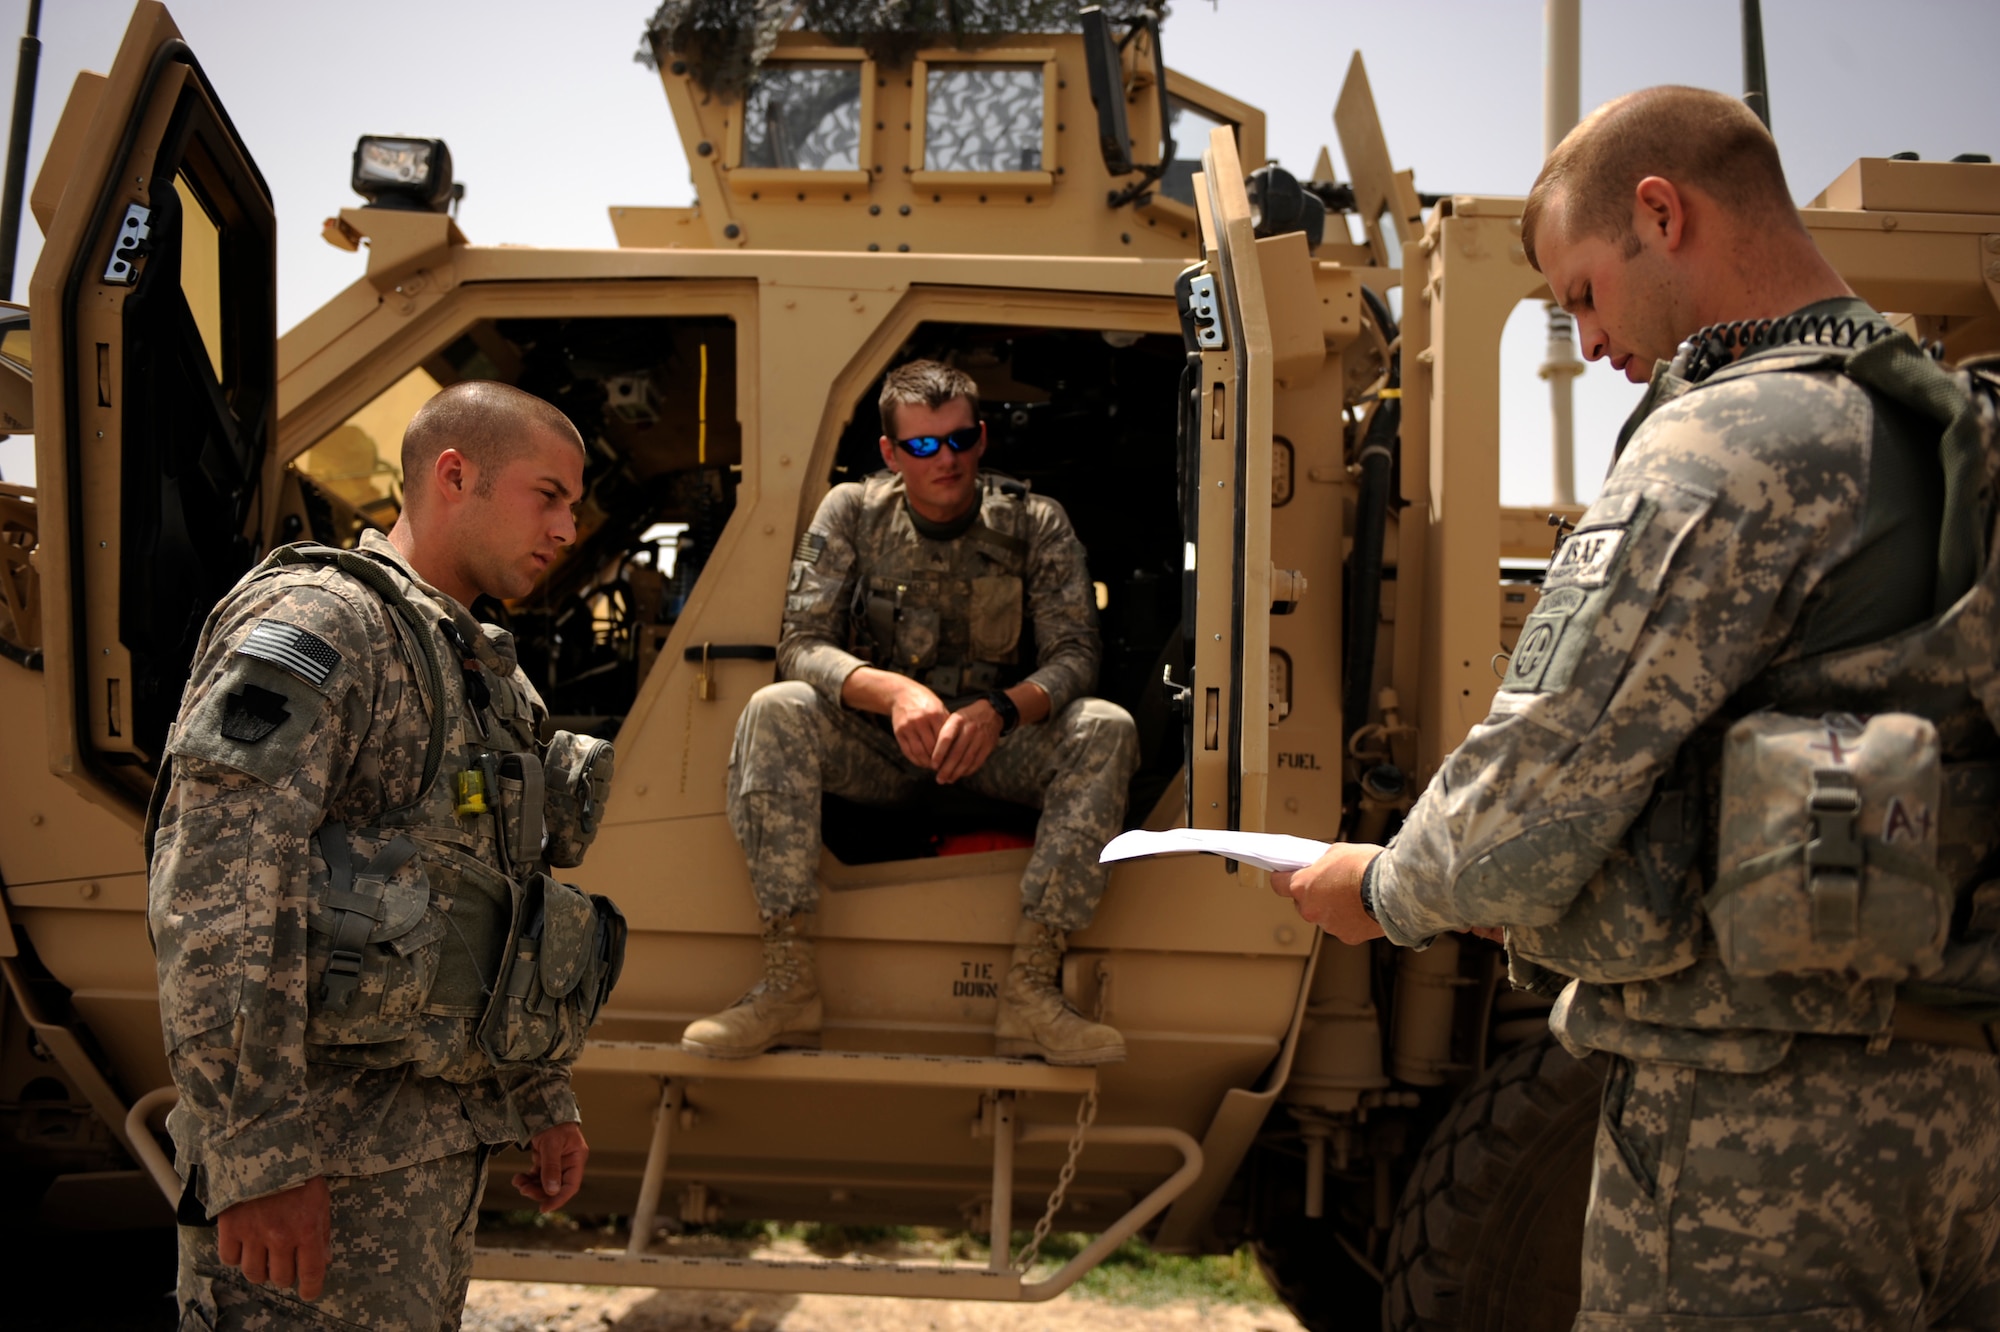 Army Sergeant Robert Crosier, right, a truck commander assigned to Provincial Reconstruction Team Zabul, briefs his gunner and driver before heading out on a Shura mission in a local village May 22, 2010. (U.S. Air Force photo/Staff Sgt. Manuel J. Martinez/released) 